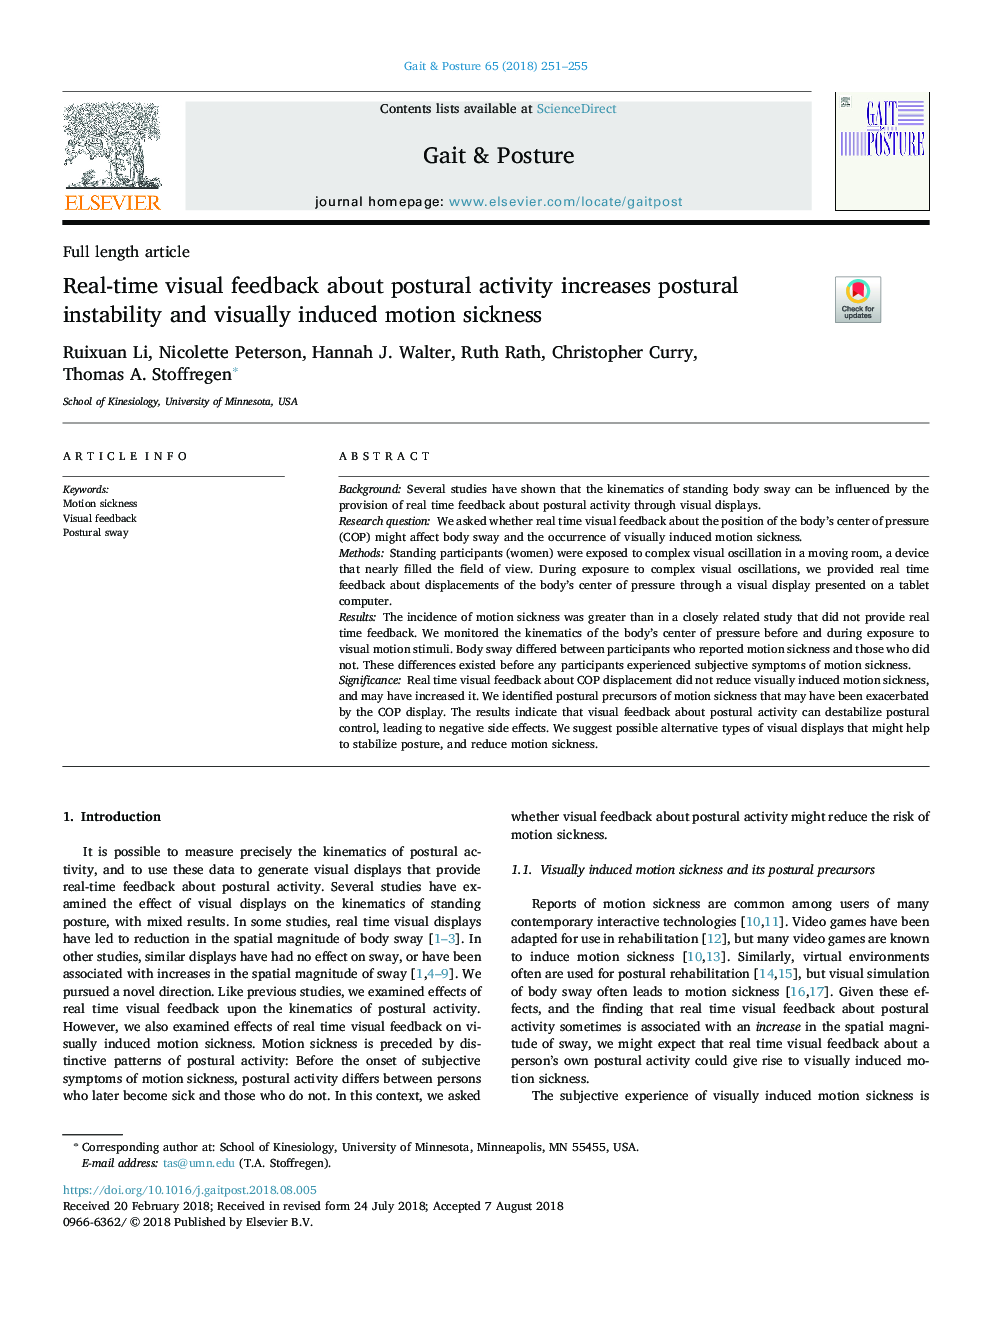 Real-time visual feedback about postural activity increases postural instability and visually induced motion sickness